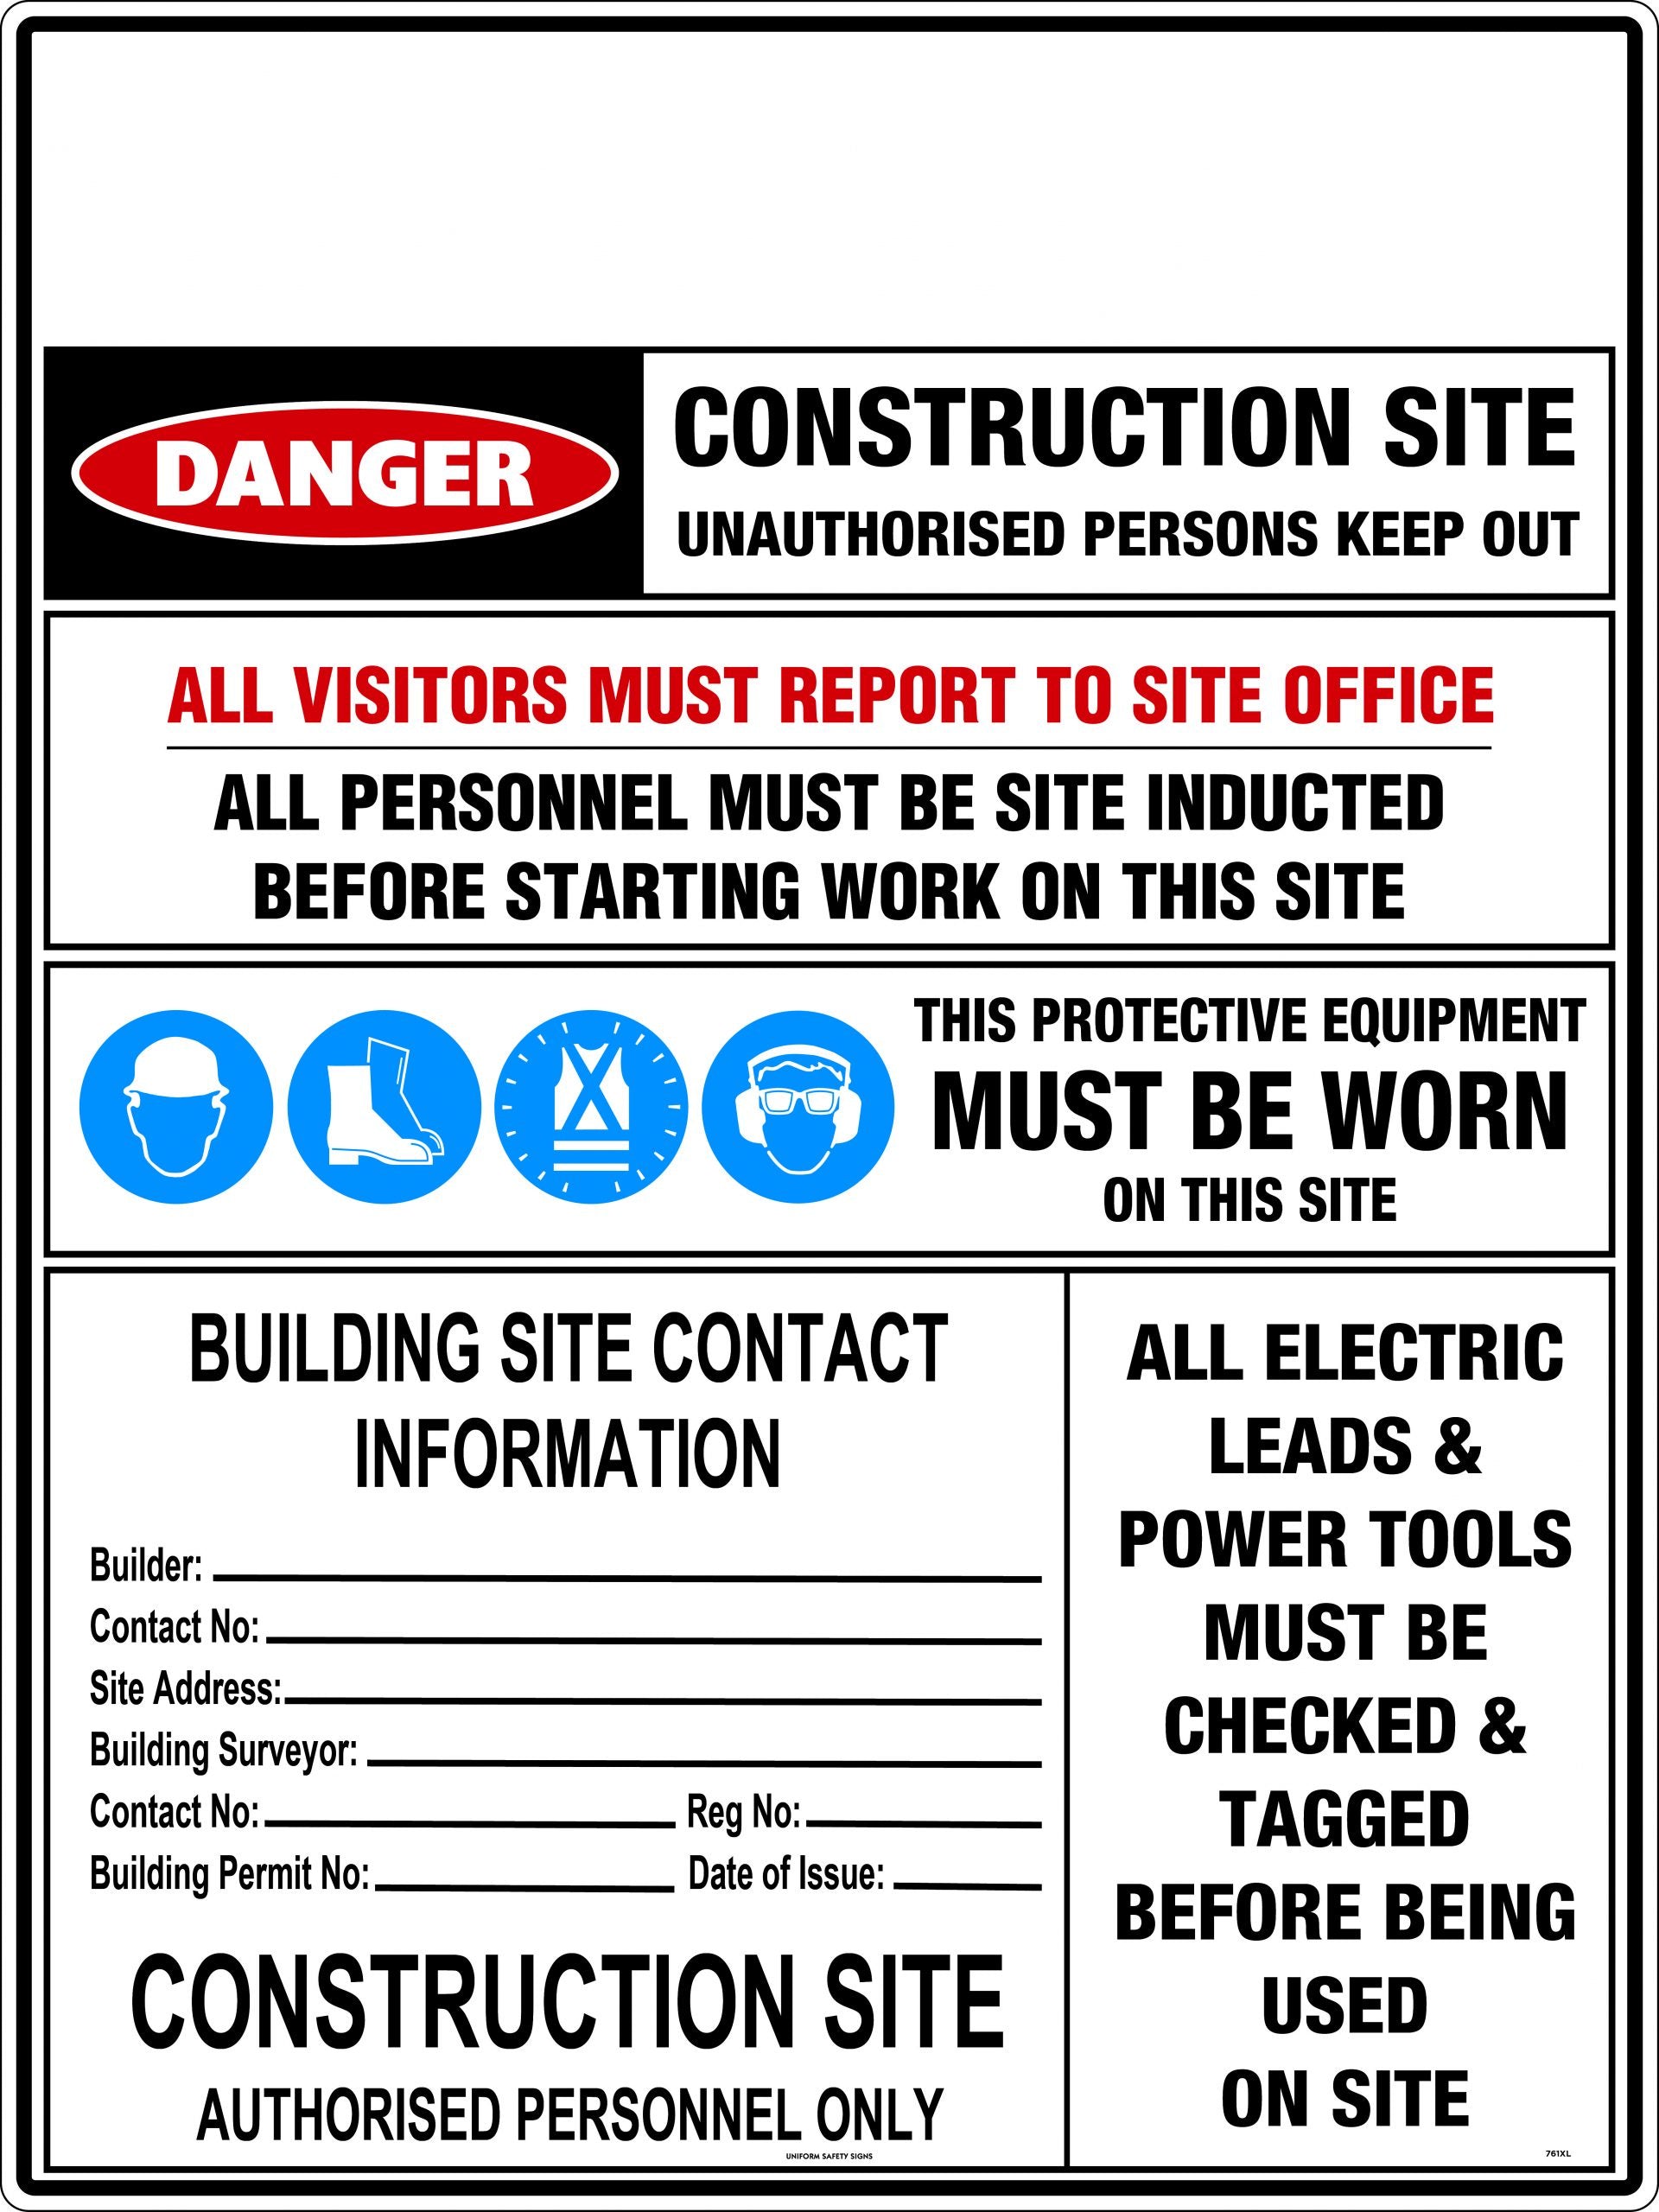 Construction Site Safety Requirements [With Building Site Contact Information] (Customer Logo:____) Metal Sign 1200x900 - 761XLM